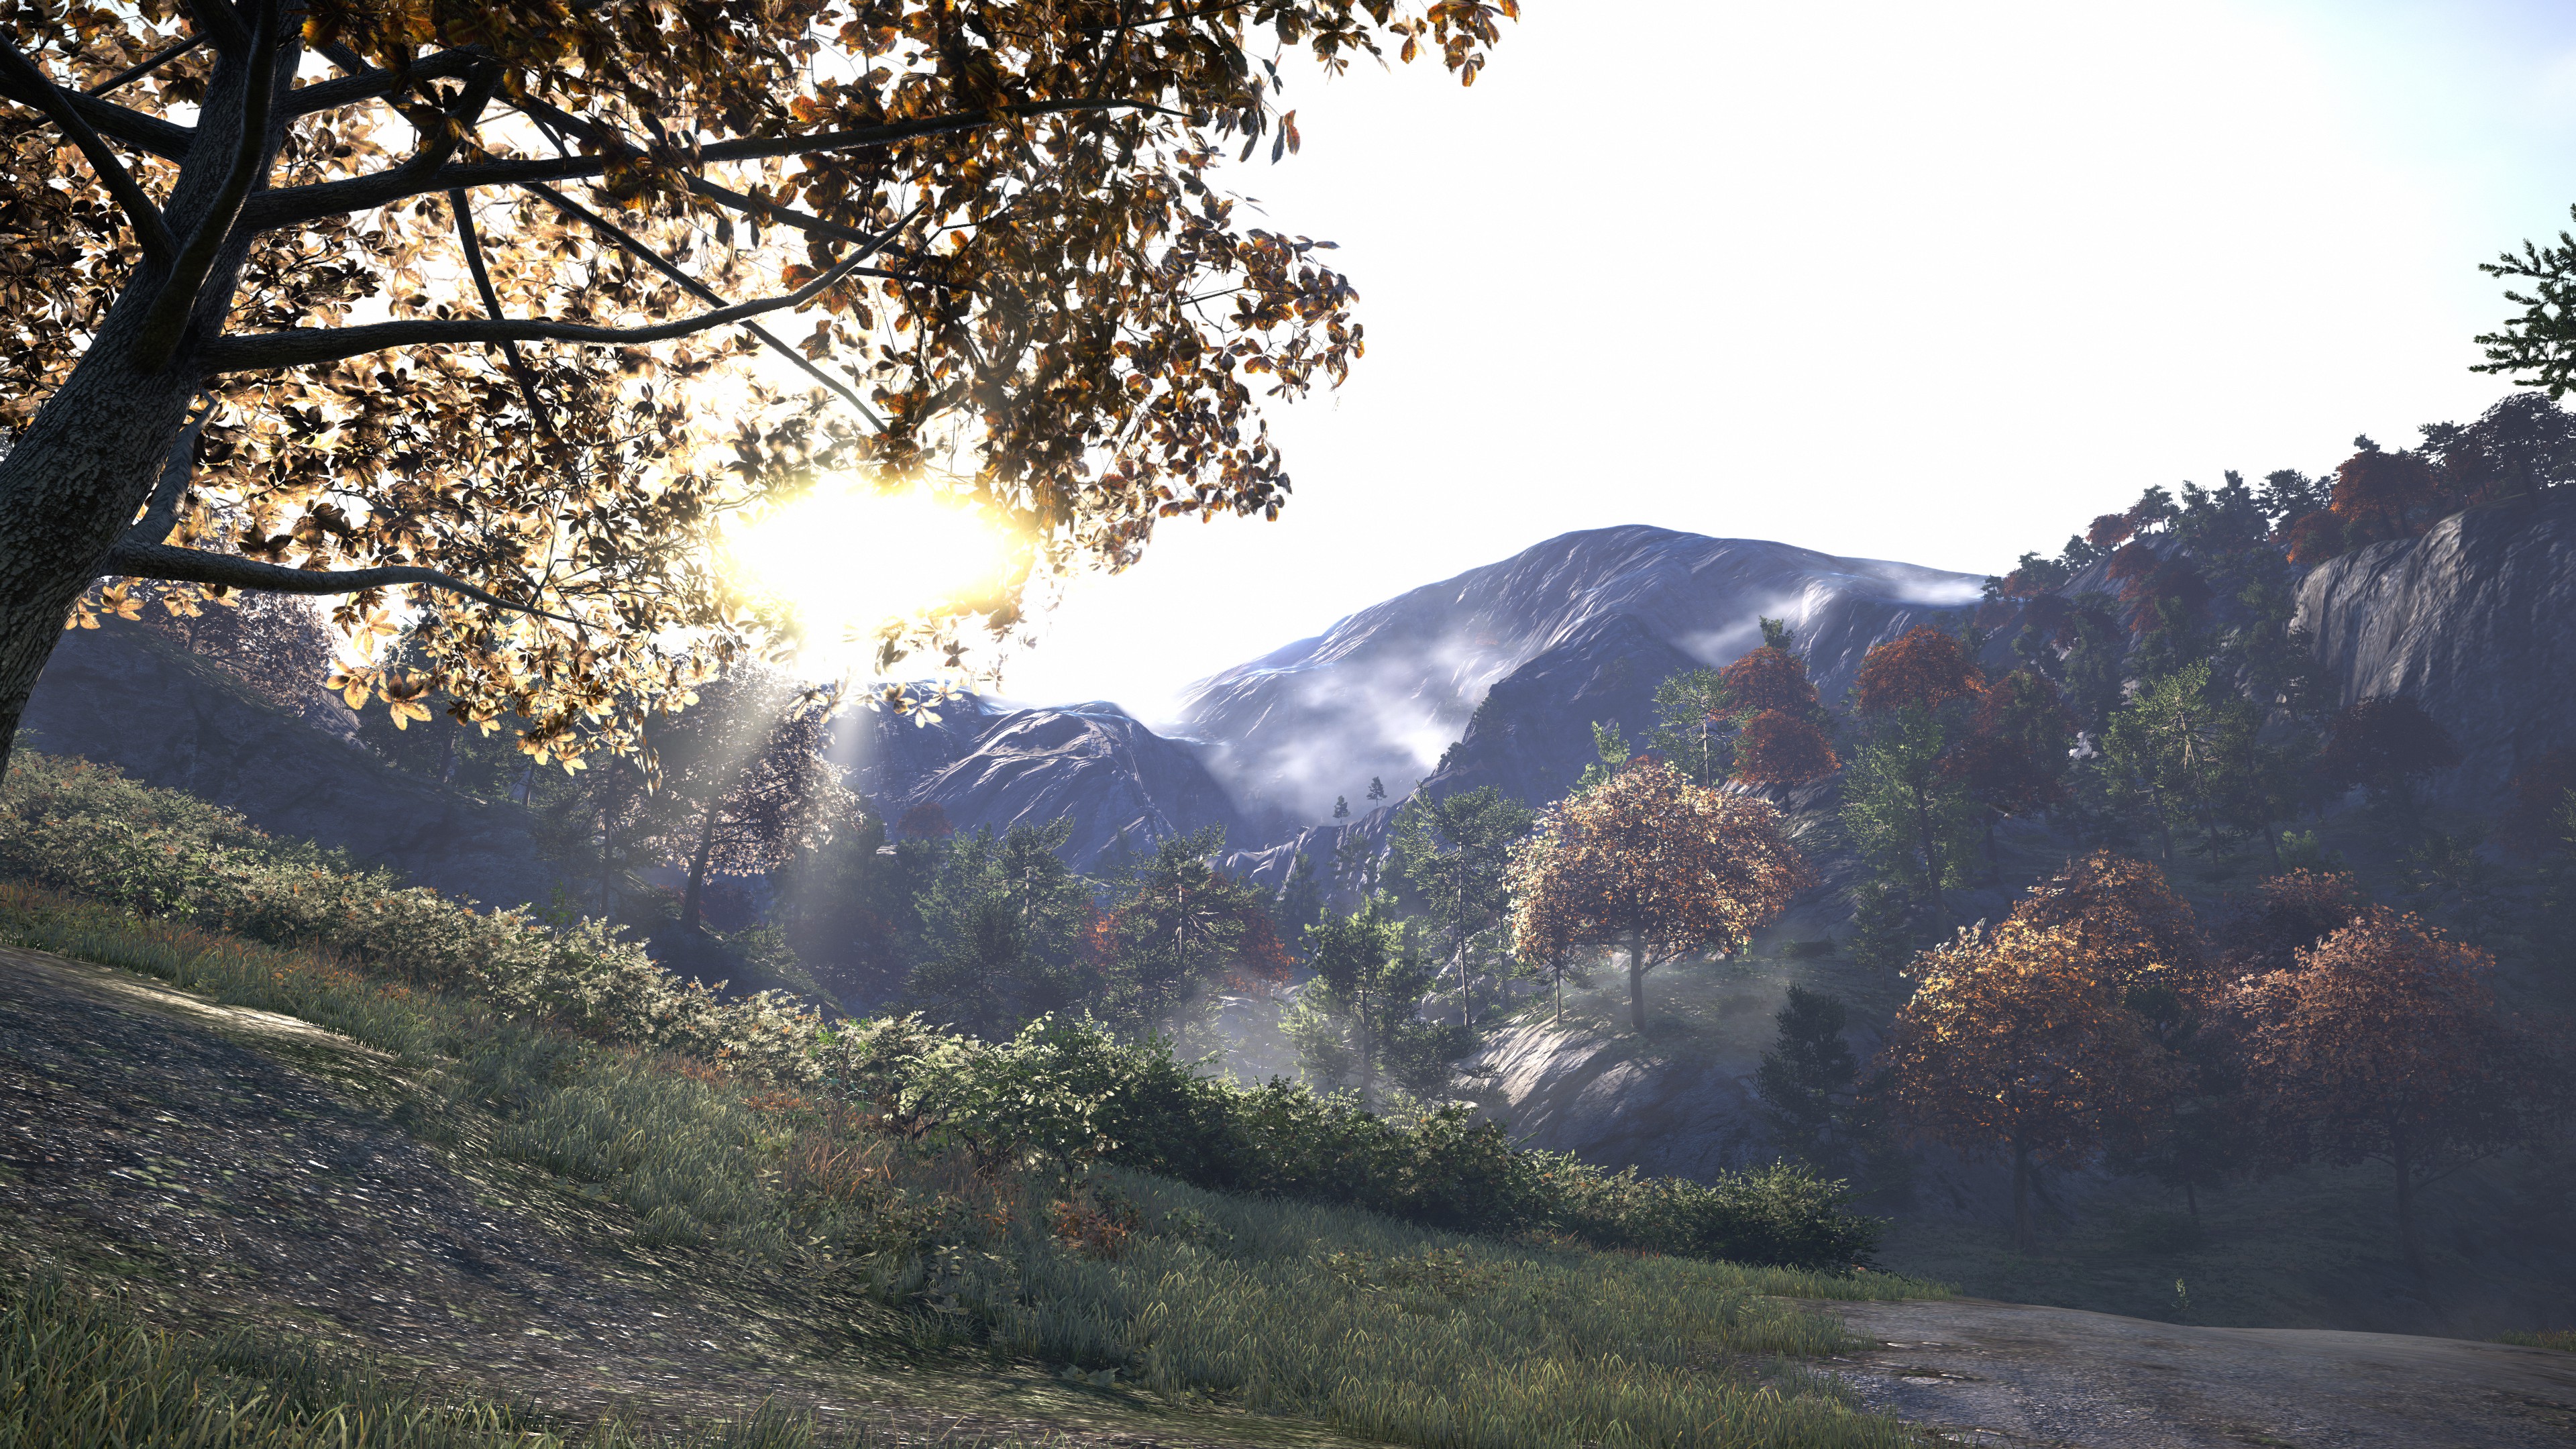 Video Game Far Cry 4 HD Wallpaper | Background Image